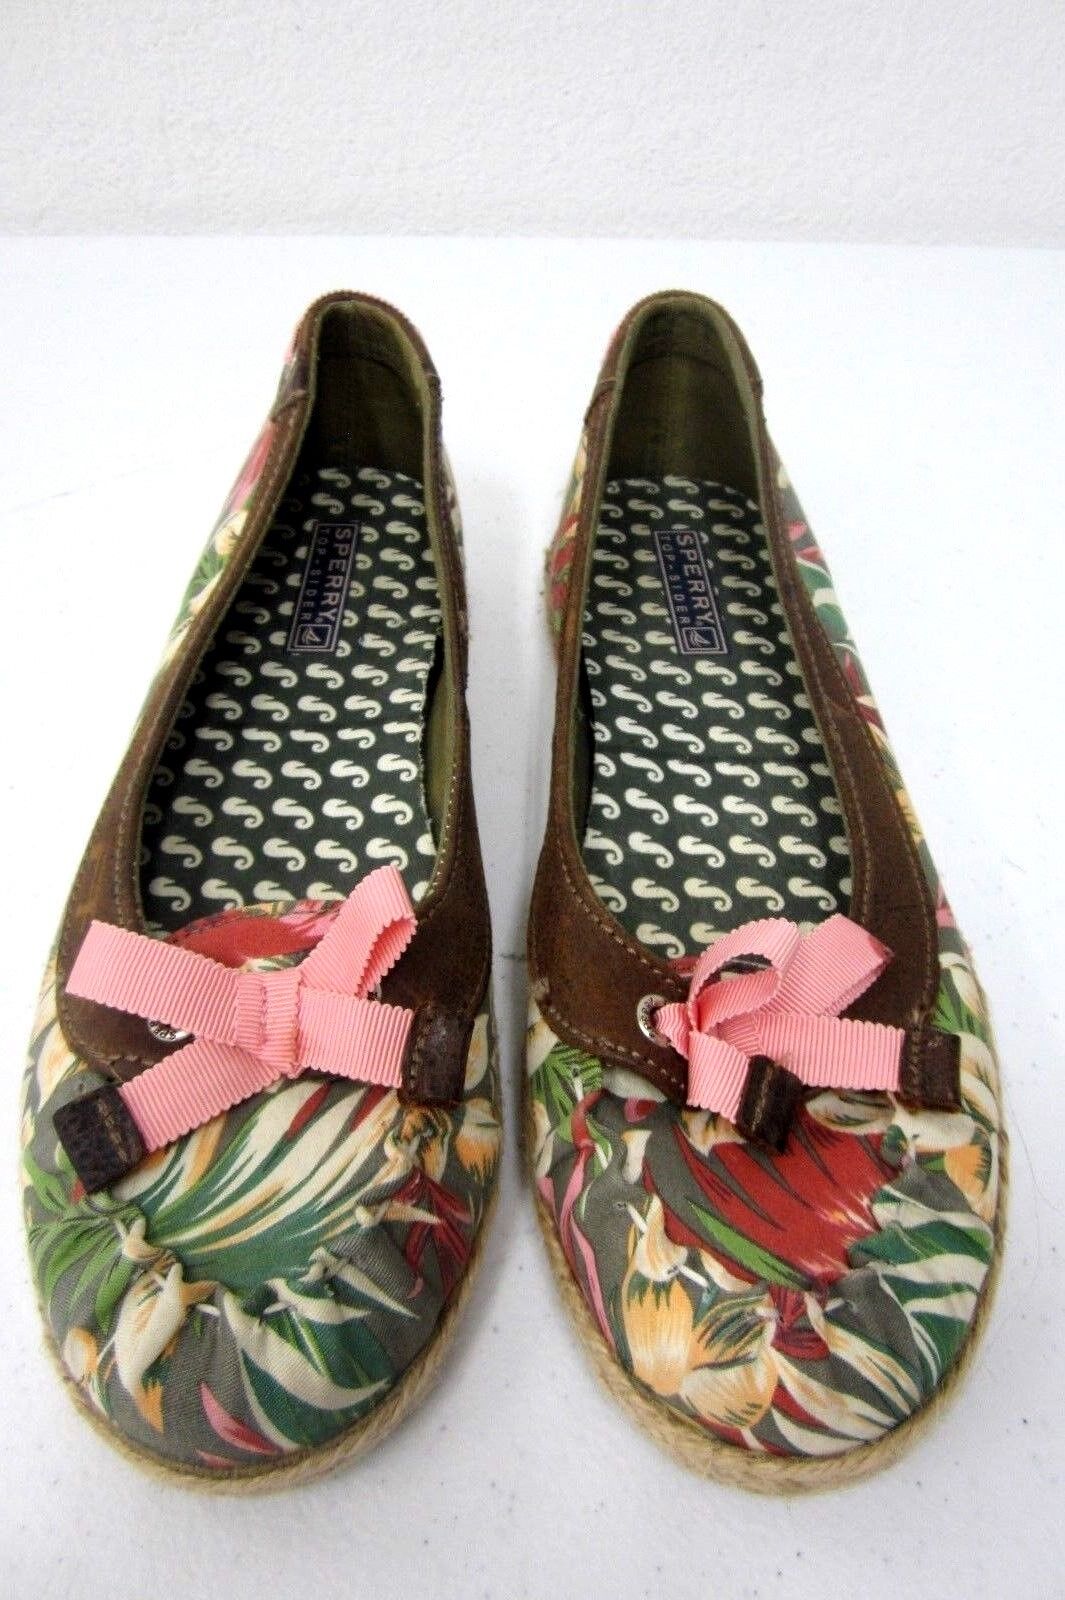 Sperry Top-Sider Tan Leather/Flowered Fabric Pink Bow Boat Shoe Women Size 8.5M